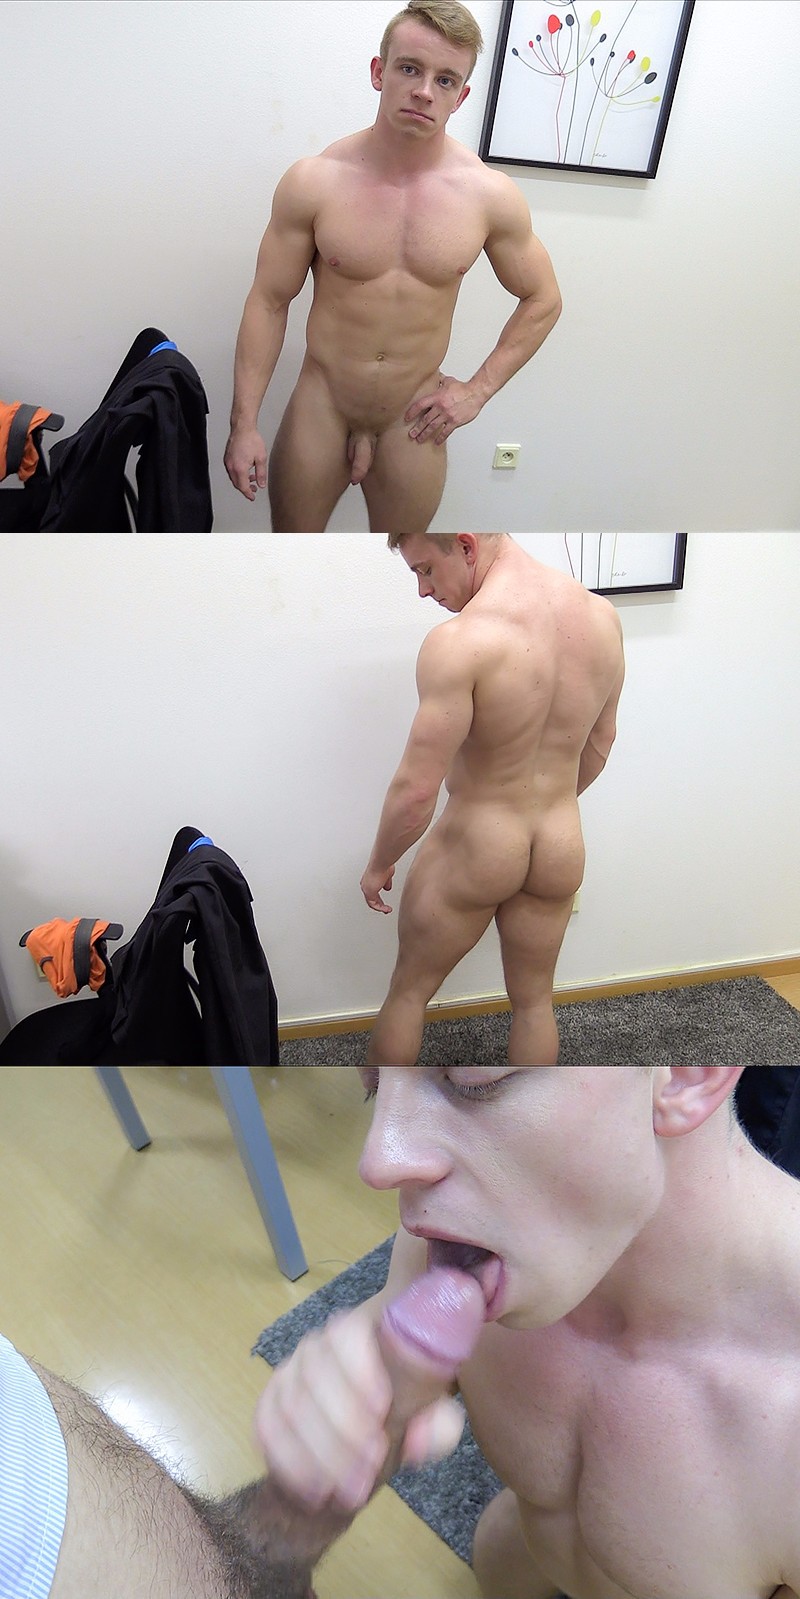 Blond Muscle Boy Gets Fucked During a Job Interview